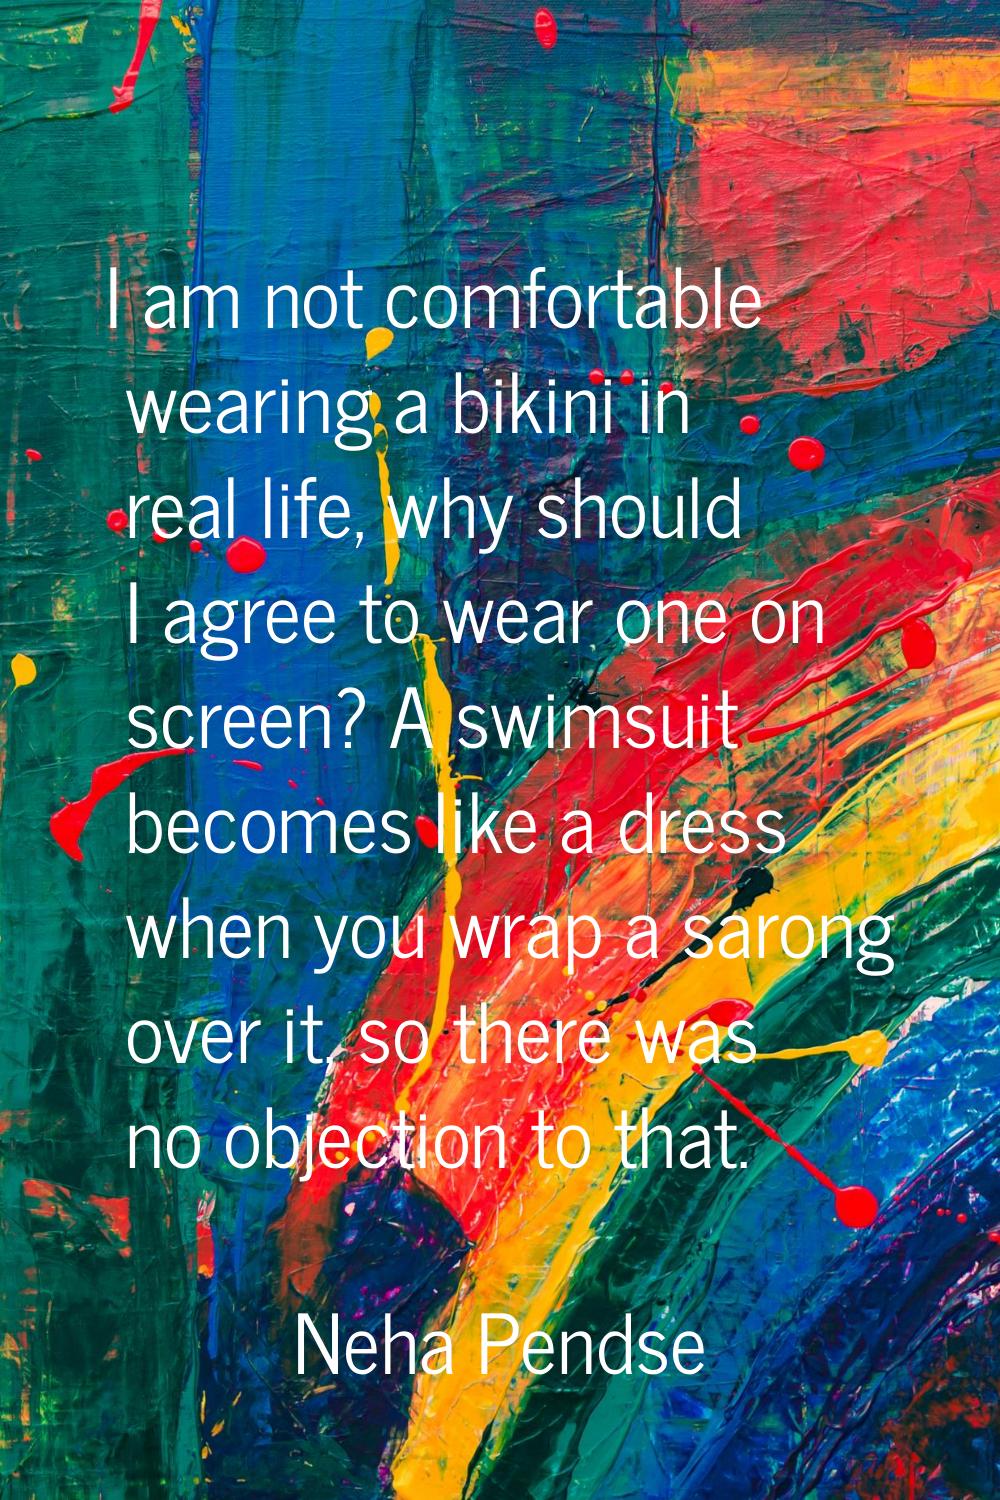 I am not comfortable wearing a bikini in real life, why should I agree to wear one on screen? A swi